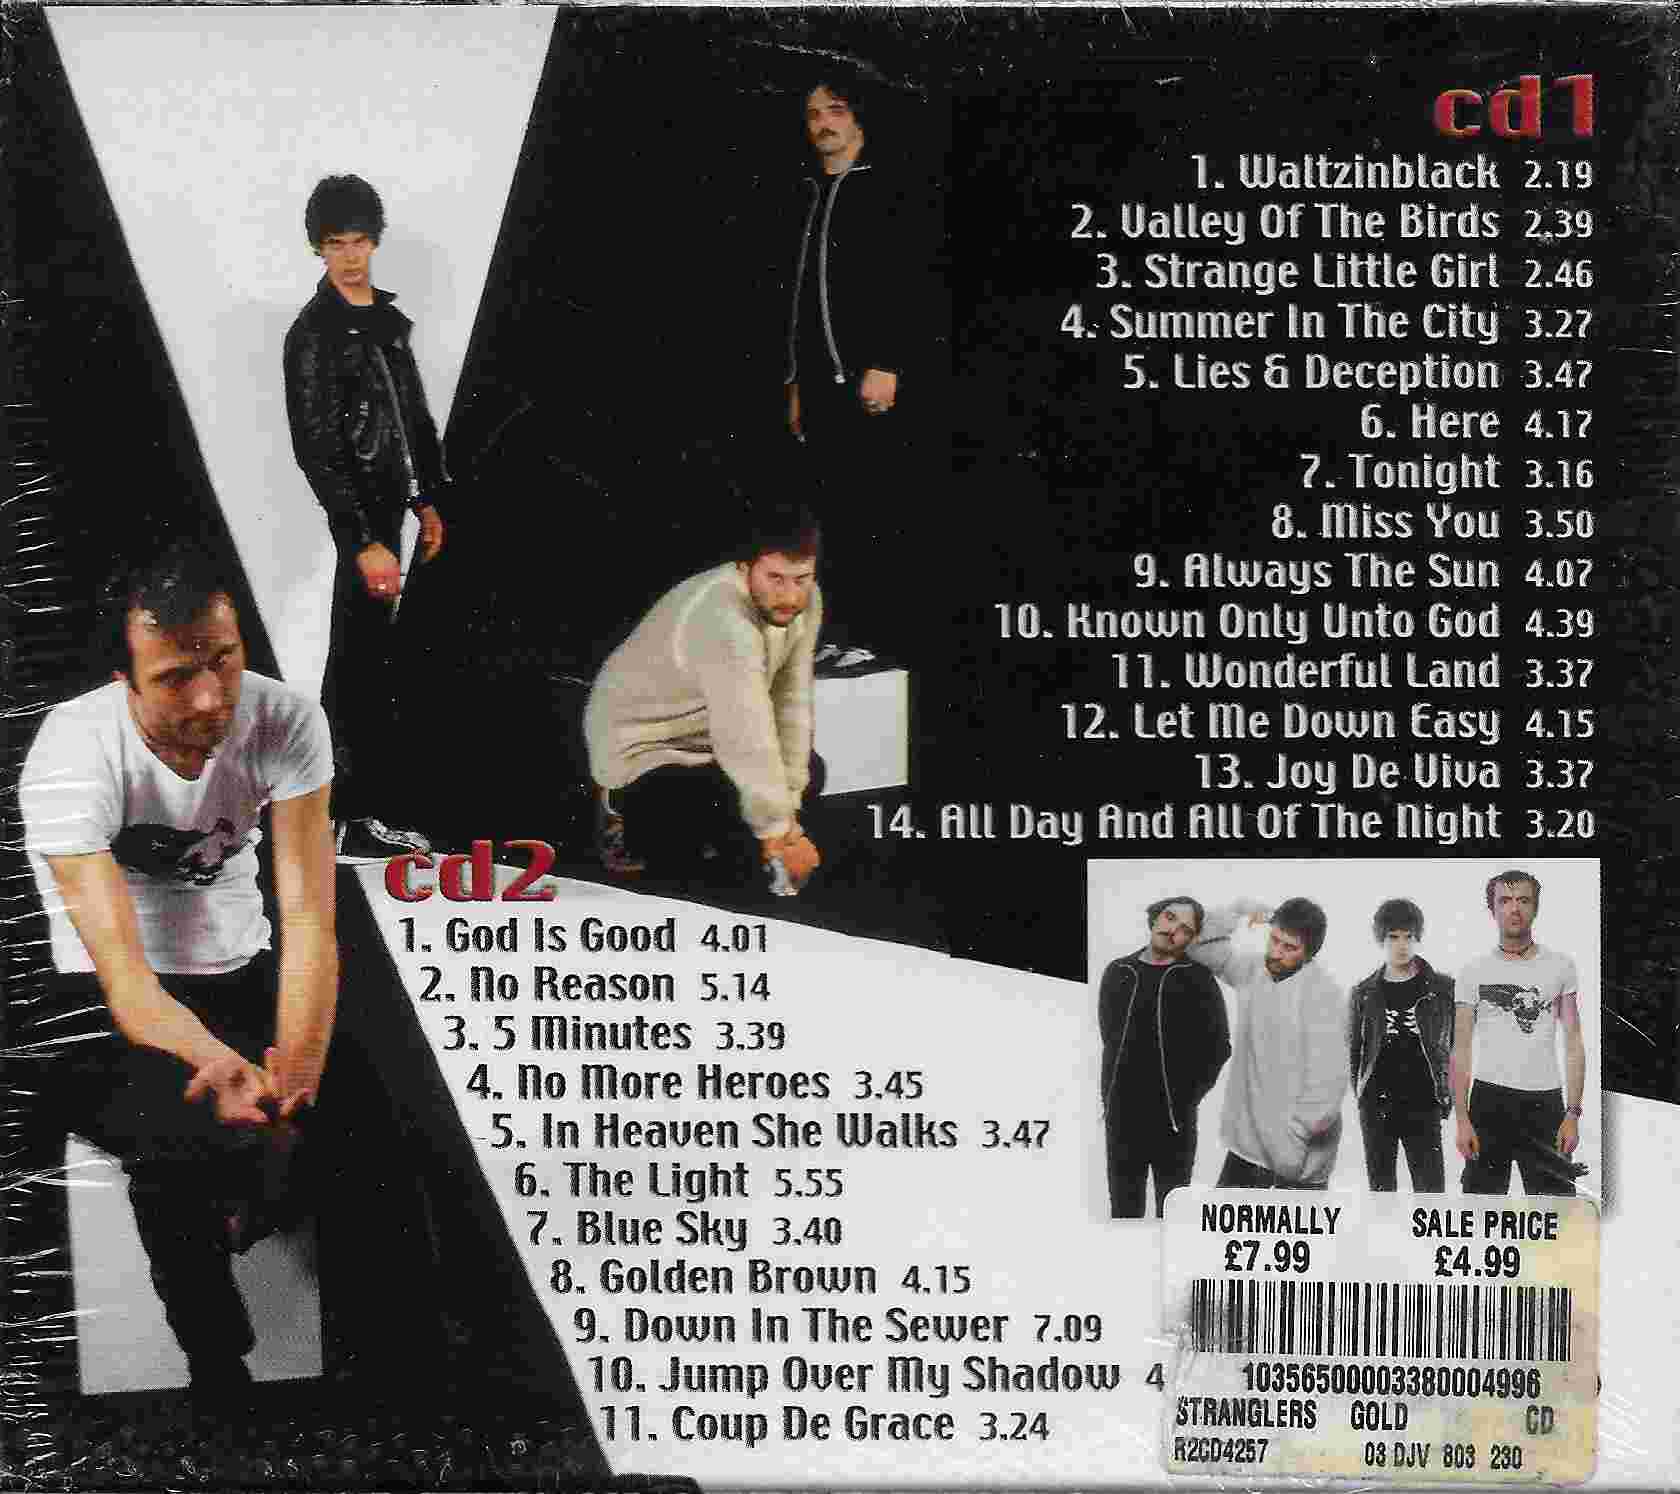 Picture of R2CD 42-57 Gold by artist The Stranglers from The Stranglers